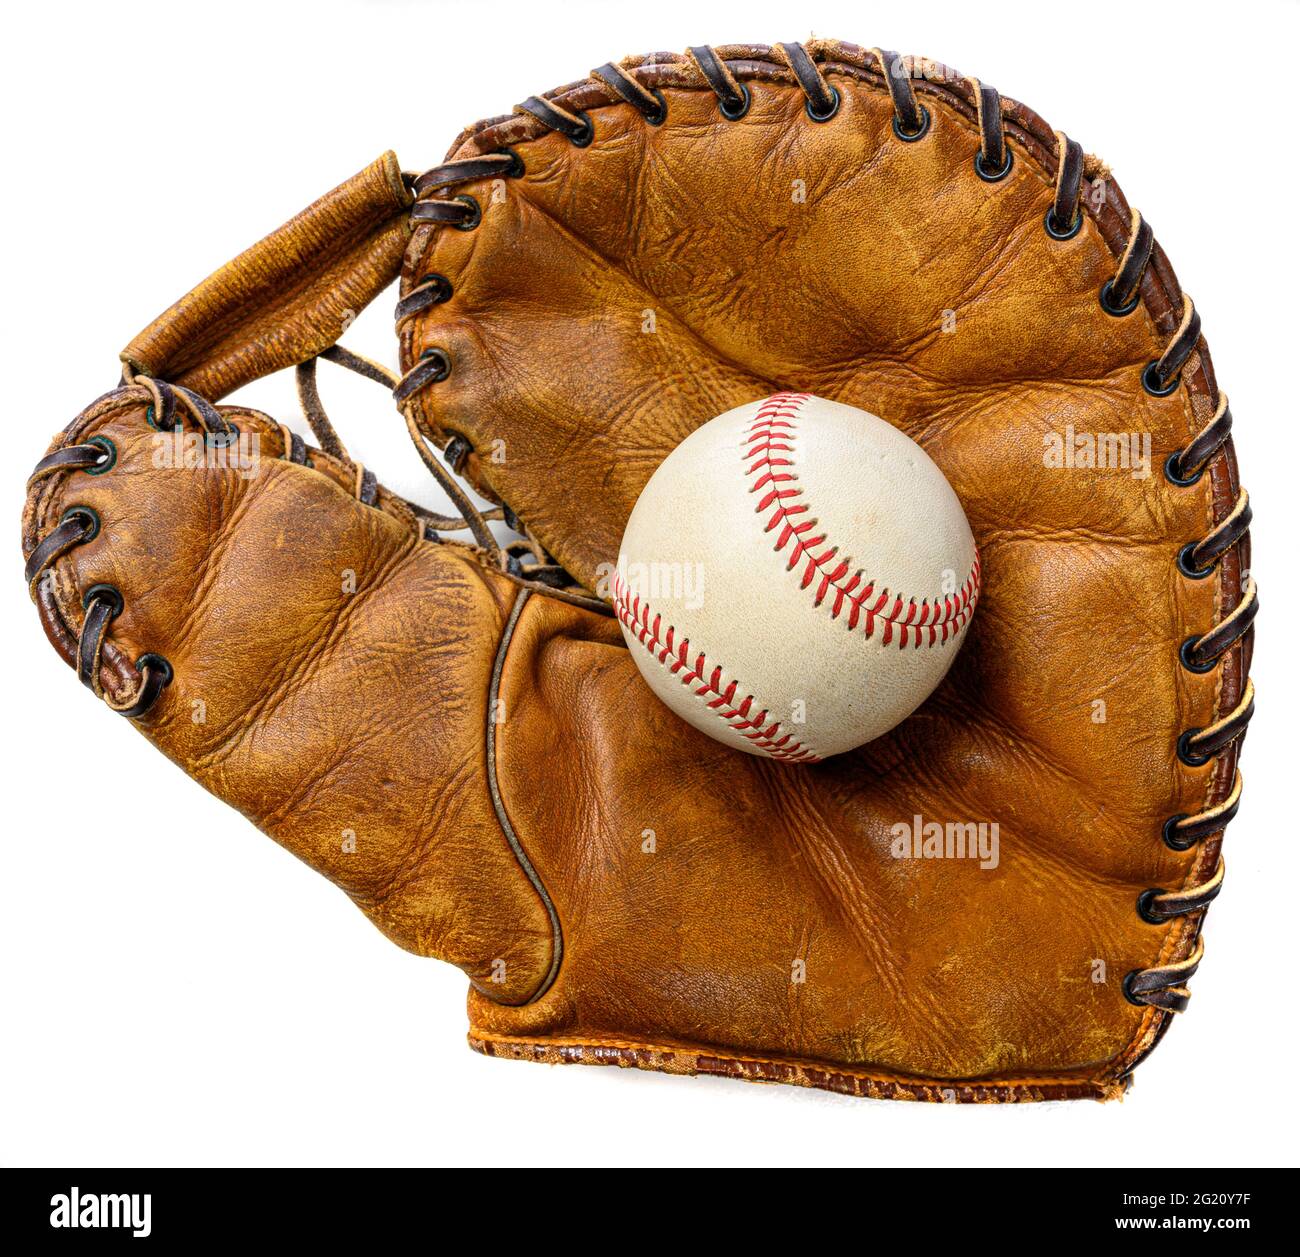 A white leather baseball in a brown vintage, antique glove Stock Photo